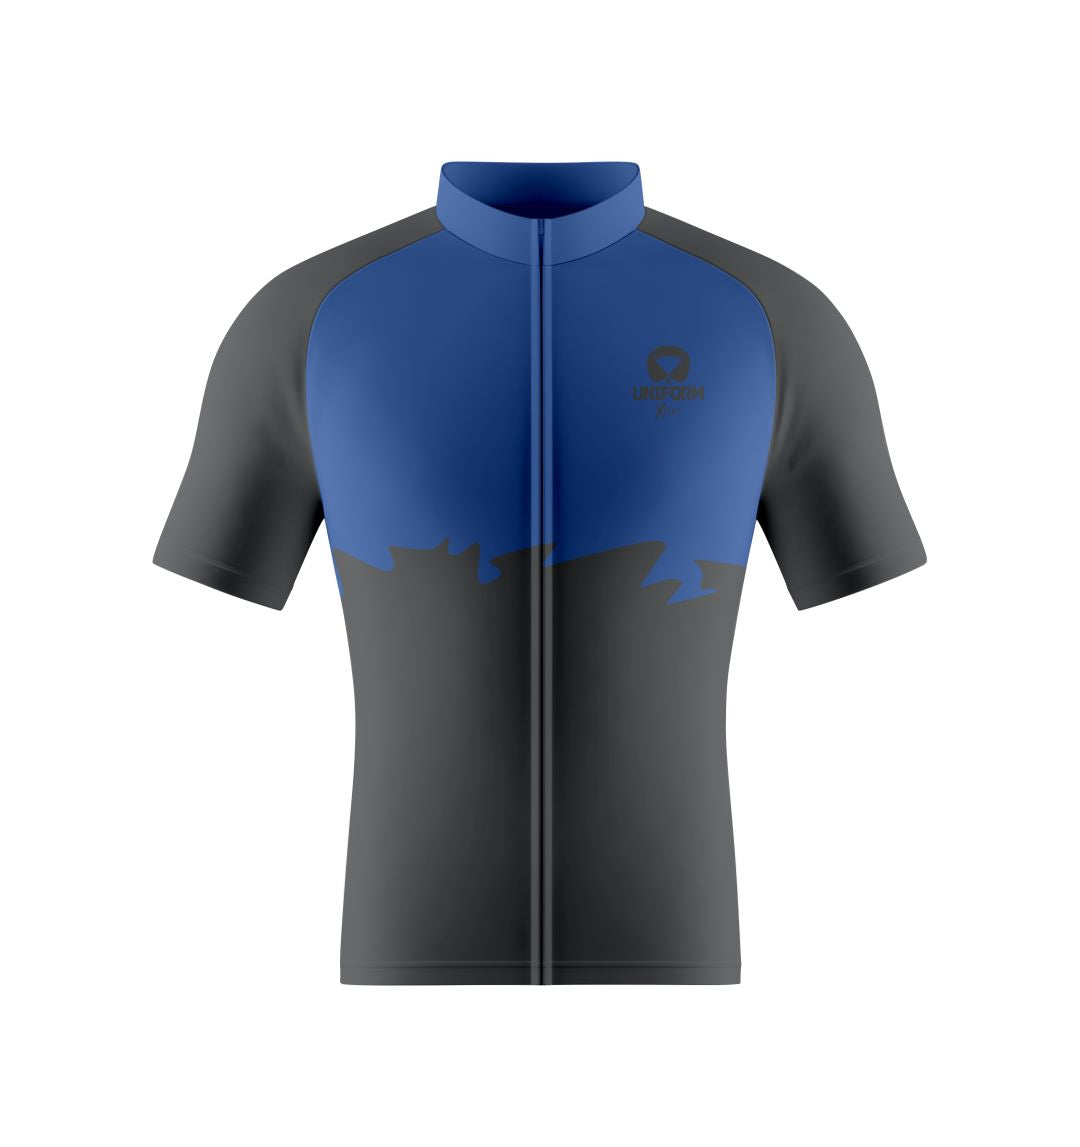 Blue Cycling Uniform: This sleek blue cycling set includes a breathable jersey and shorts. Designed for road and mountain biking, it offers comfort, performance, and an aerodynamic fit. Ideal for cyclists who appreciate a timeless and versatile look on their rides. Keywords: blue cycling uniform, cycling jersey, cycling shorts, road biking, mountain biking, professional cycling, cycling kit, cycling apparel, cycling gear, biking clothes, cycling outfit